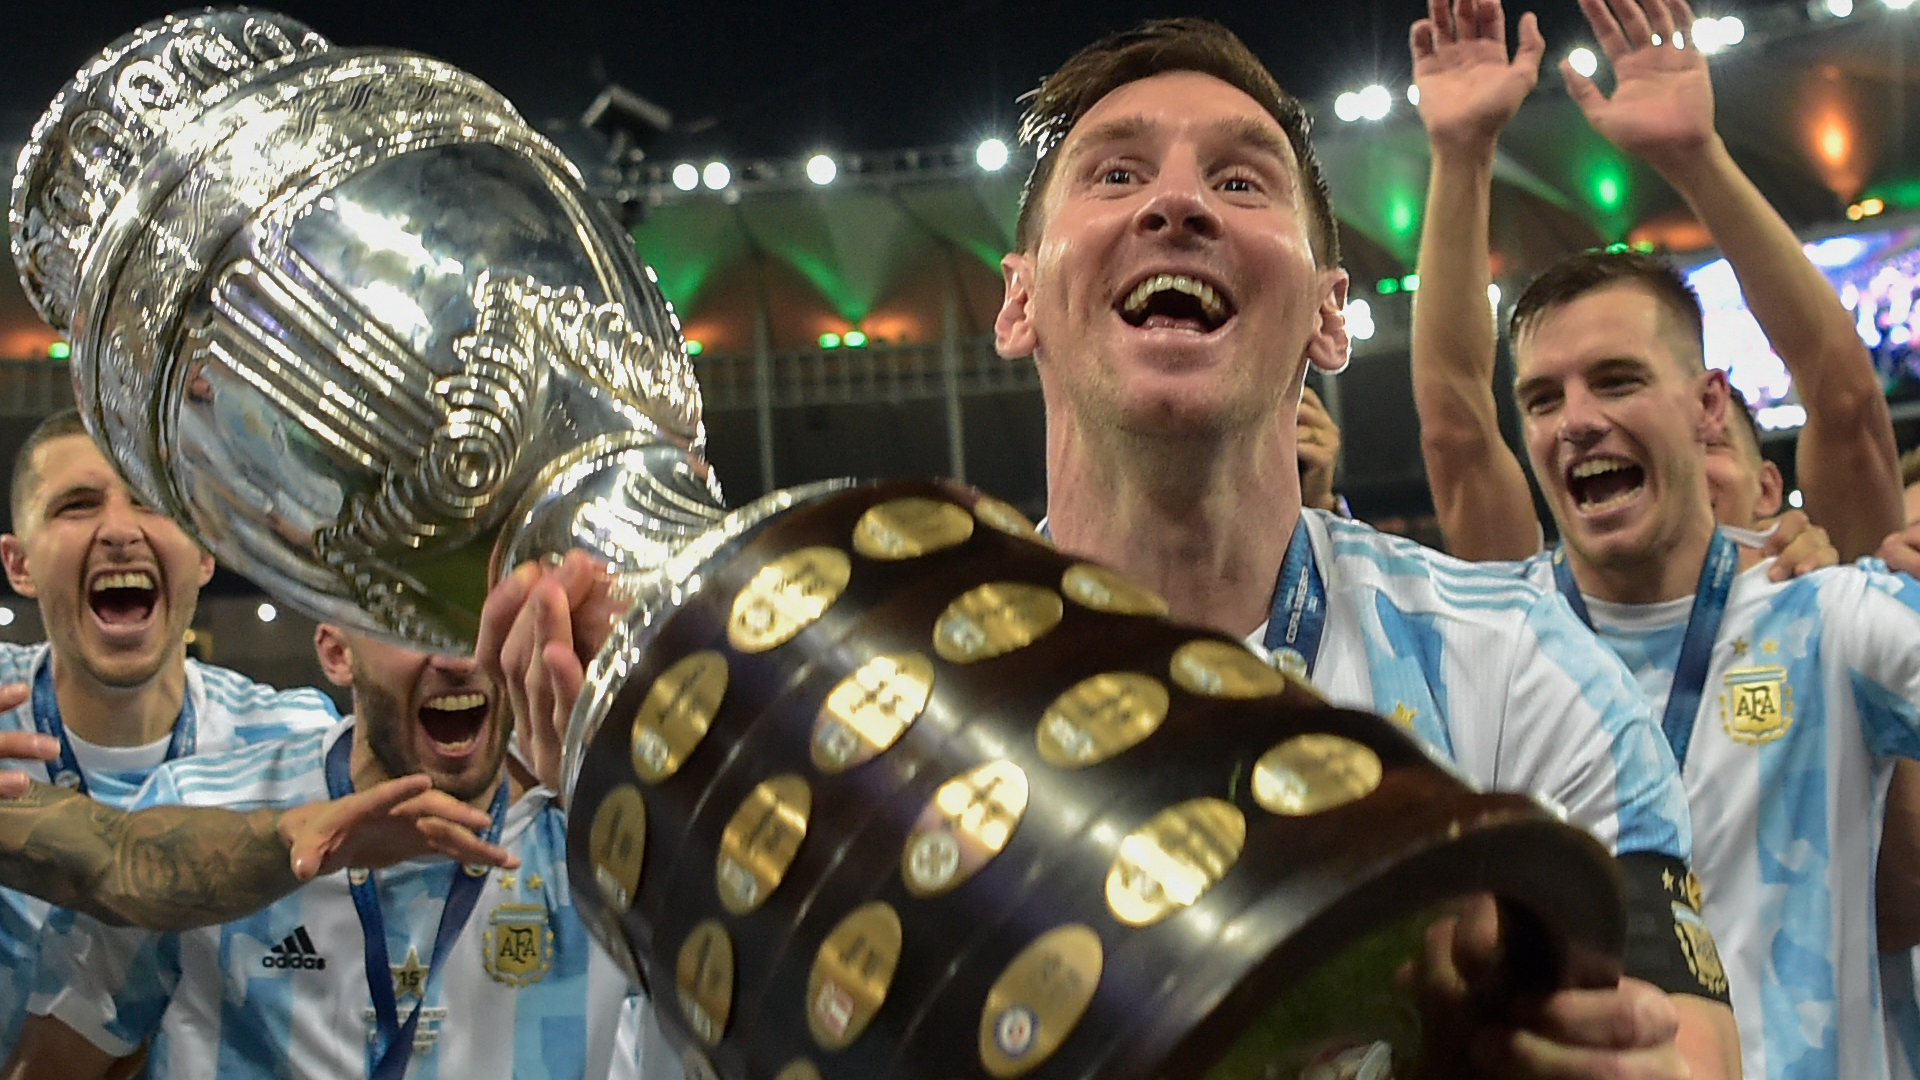 Messi is the favourite to win the Ballon d'Or, says Koeman as Barcelona coach discusses new signings Aguero & Depay